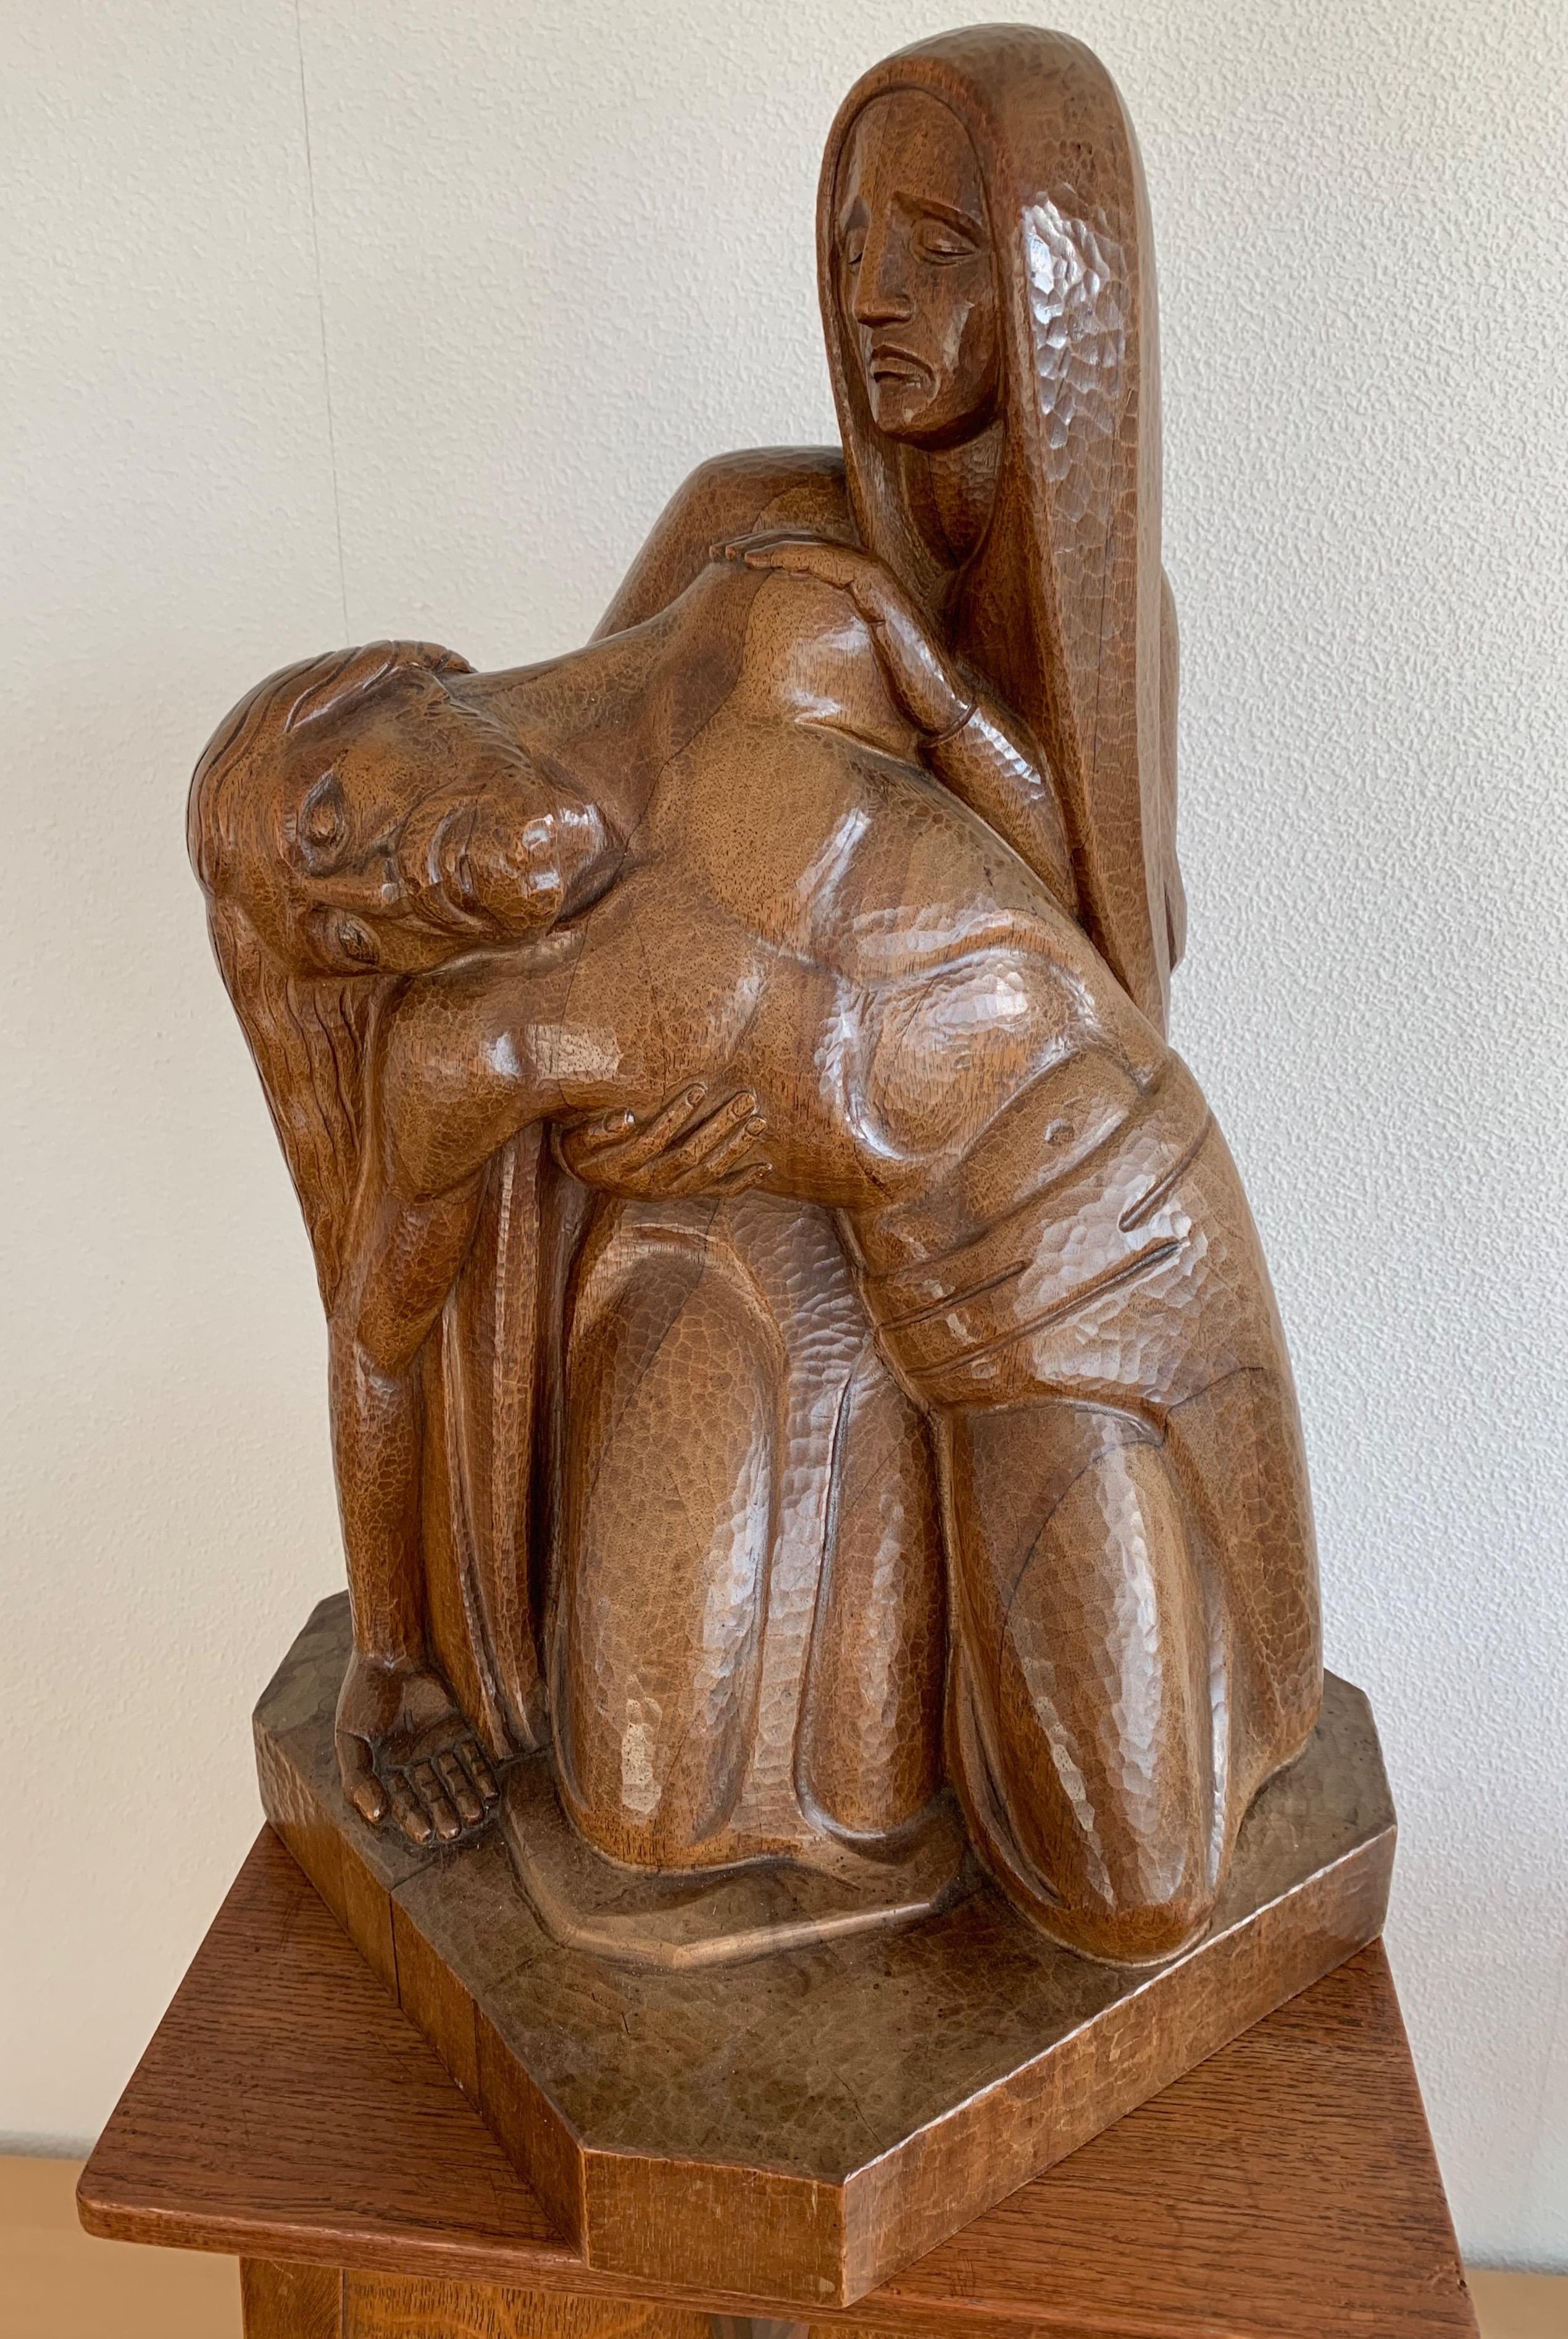 Impressive and large Art Deco Pietà carved in oak, by H. Isenmann

A Pietà, depicts the body of Jesus on the lap of mother Mary after the crucifixion. This highly impressive and angular sculpture is signed H. Isenmann and it is dated 1930 (see last